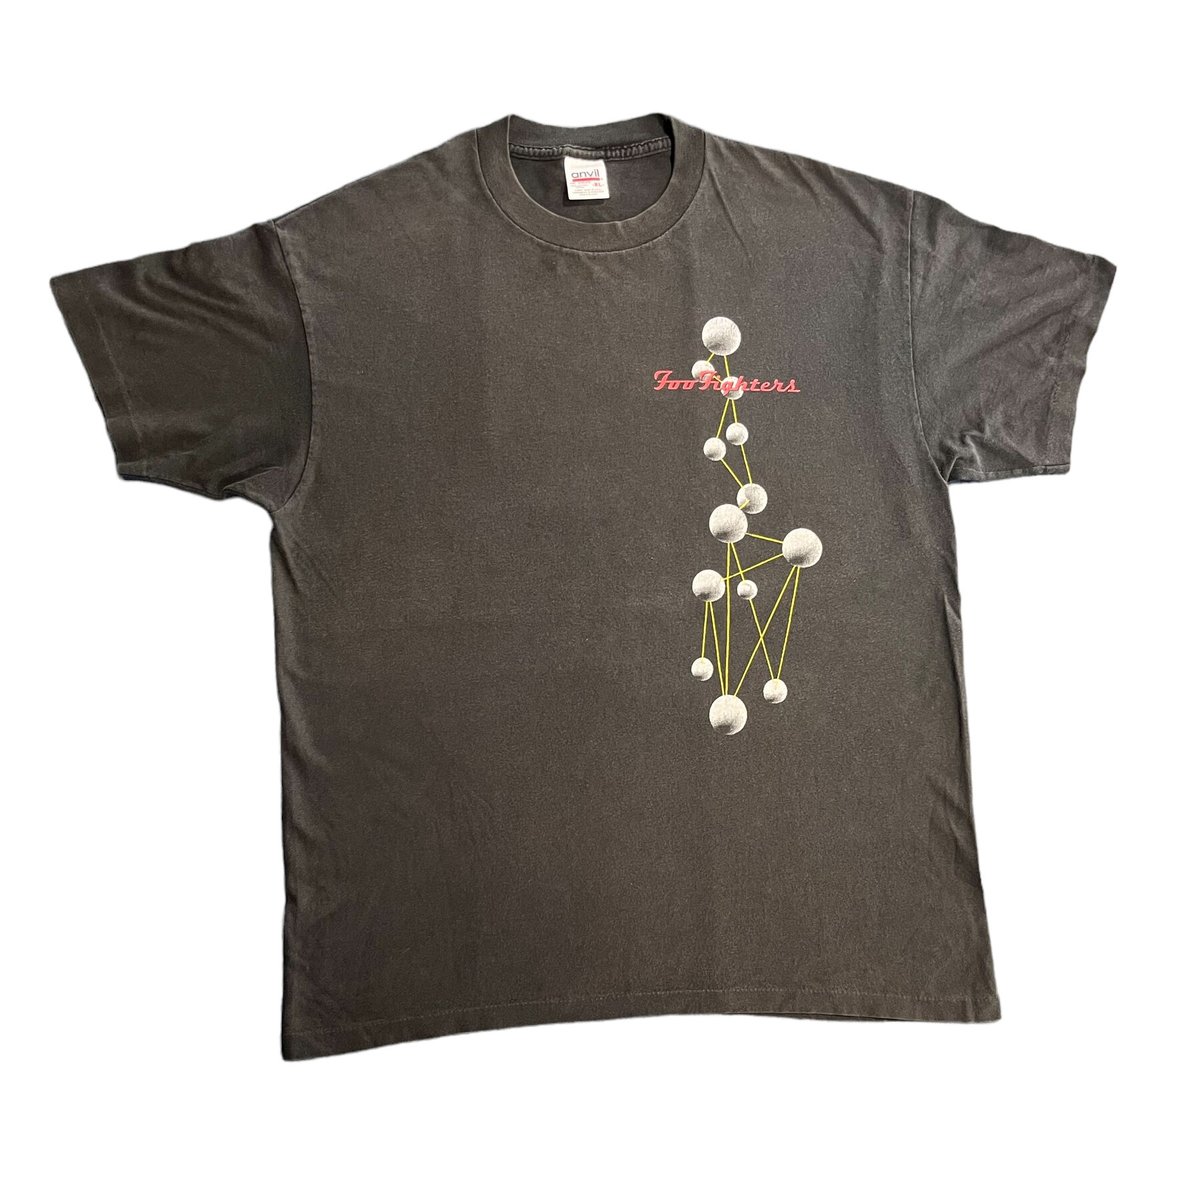 FOO FIGHTERS T-shirt | DIRTY BOOTH